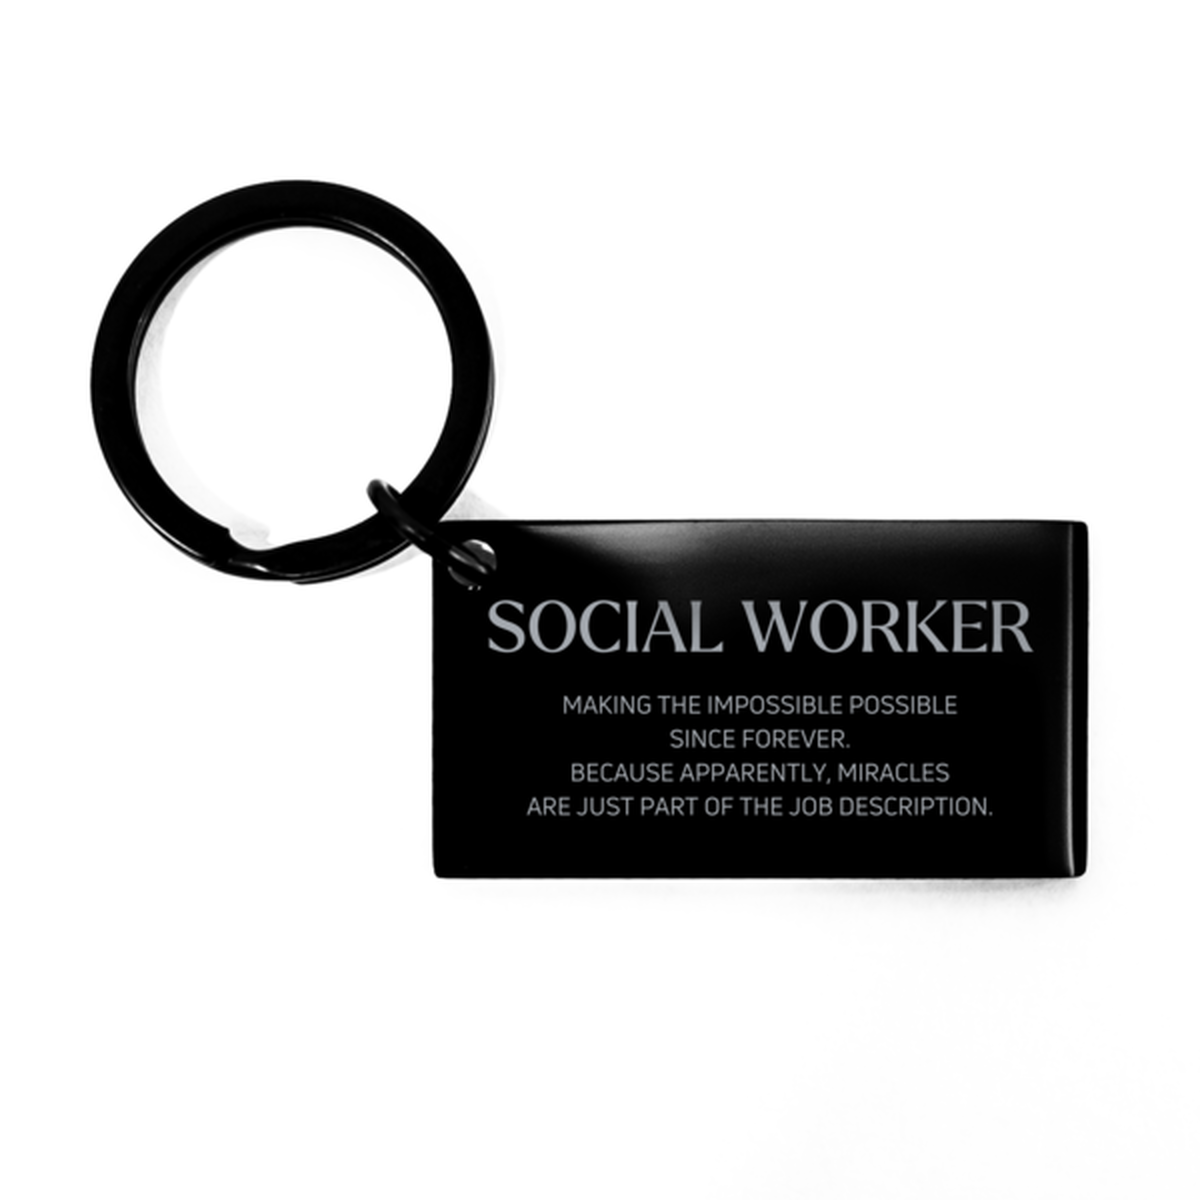 Funny Social Worker Gifts, Miracles are just part of the job description, Inspirational Birthday Keychain For Social Worker, Men, Women, Coworkers, Friends, Boss